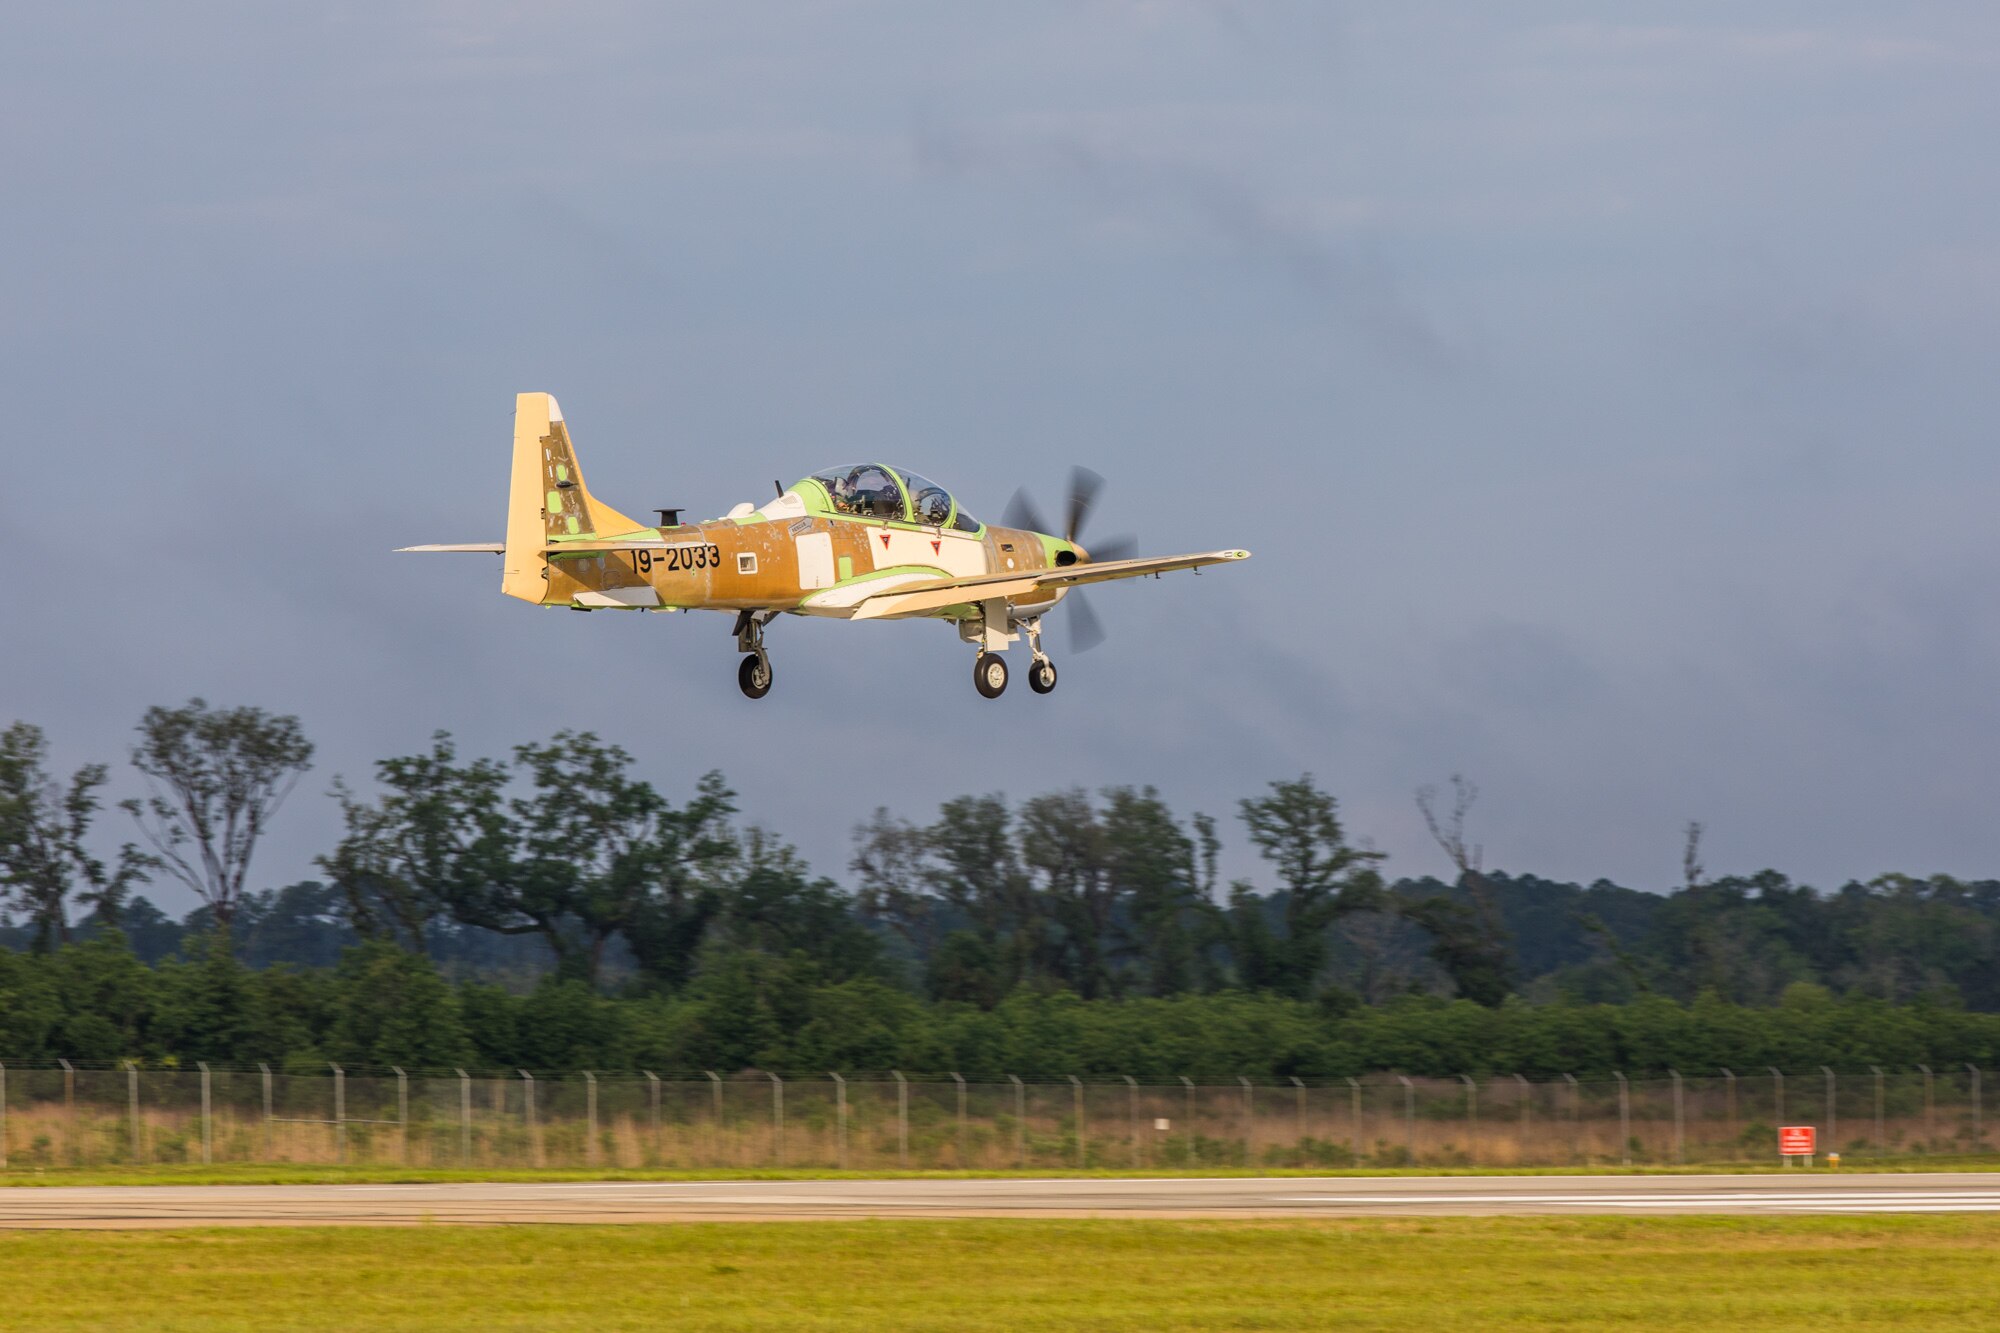 Sierra Nevada Corporation (SNC) and Embraer Defense & Security successfully conducted the inaugural flight of an 12 A-29 Super Tucano light attack, combat and reconnaissance aircraft for the Nigerian Air Force (NAF) at the production facility in Jacksonville, Florida, April 16.